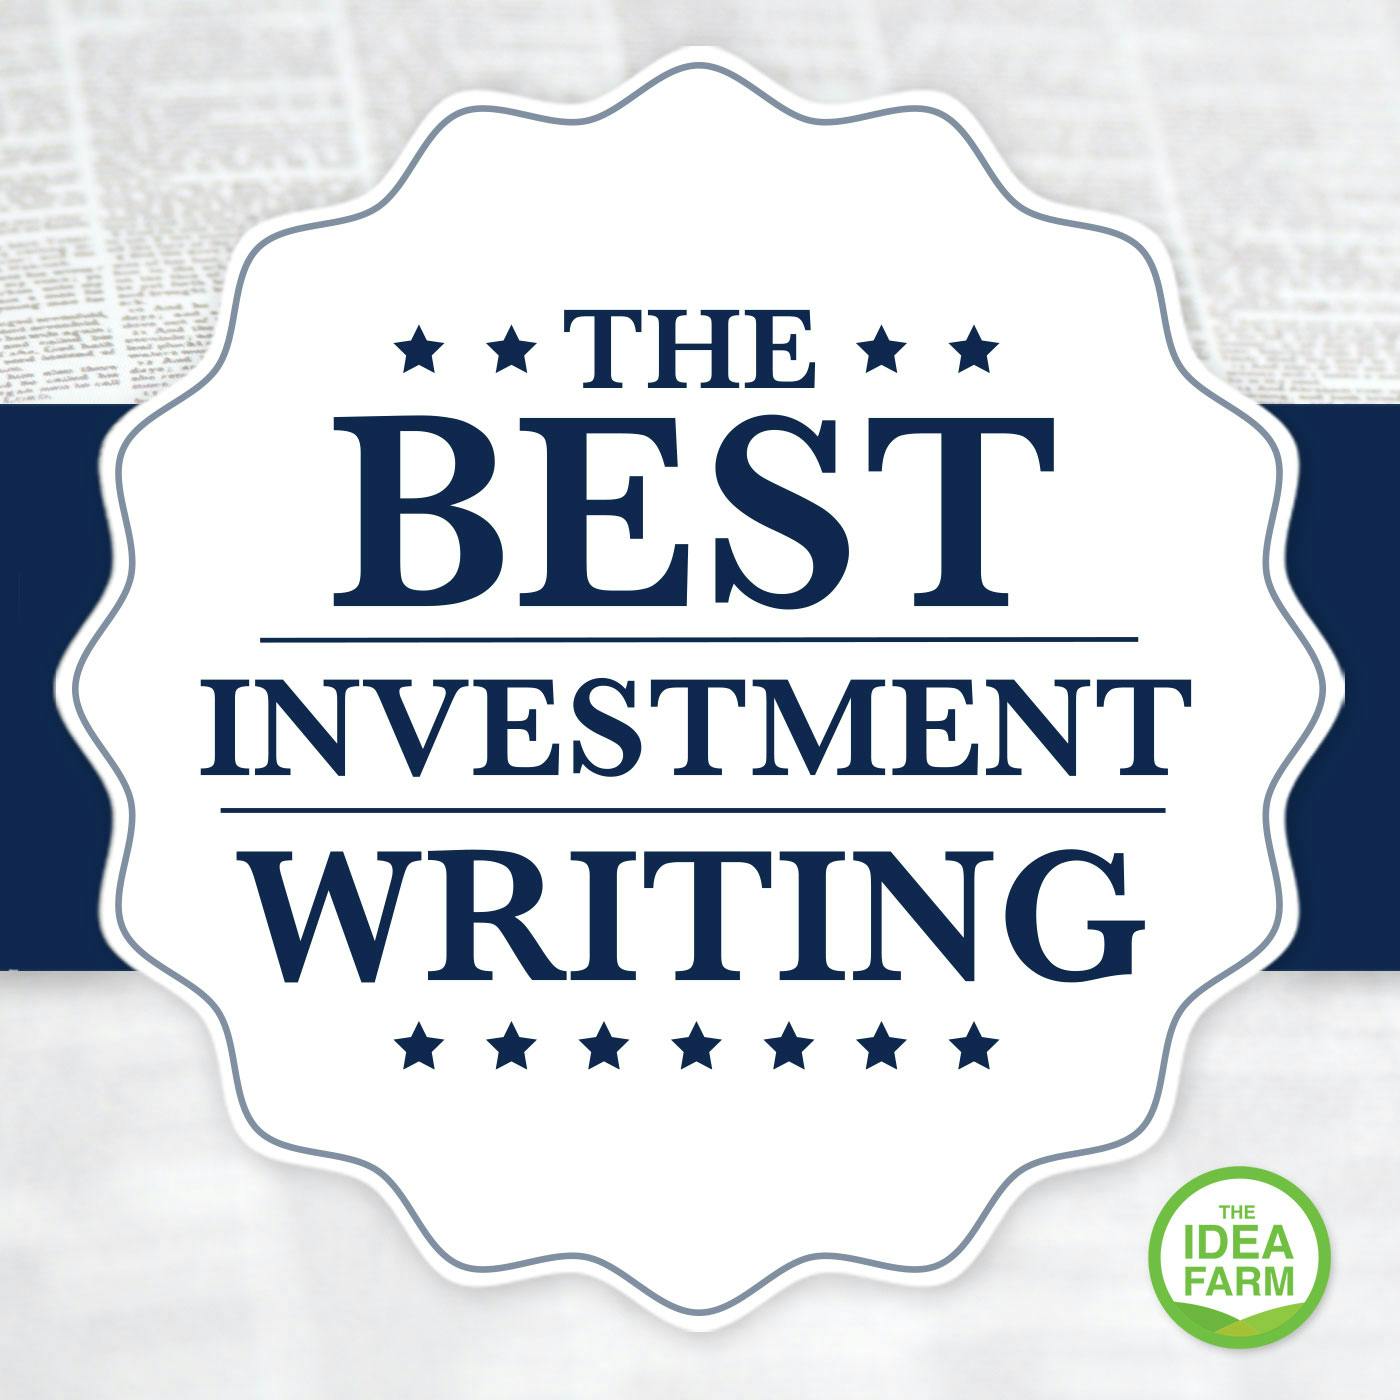 The Best Investment Writing Volume 5: Vineer Bhansali, LongTail Alpha - Diversifying Diversification: Downside Risk Management with Portfolios of Insurance Securities